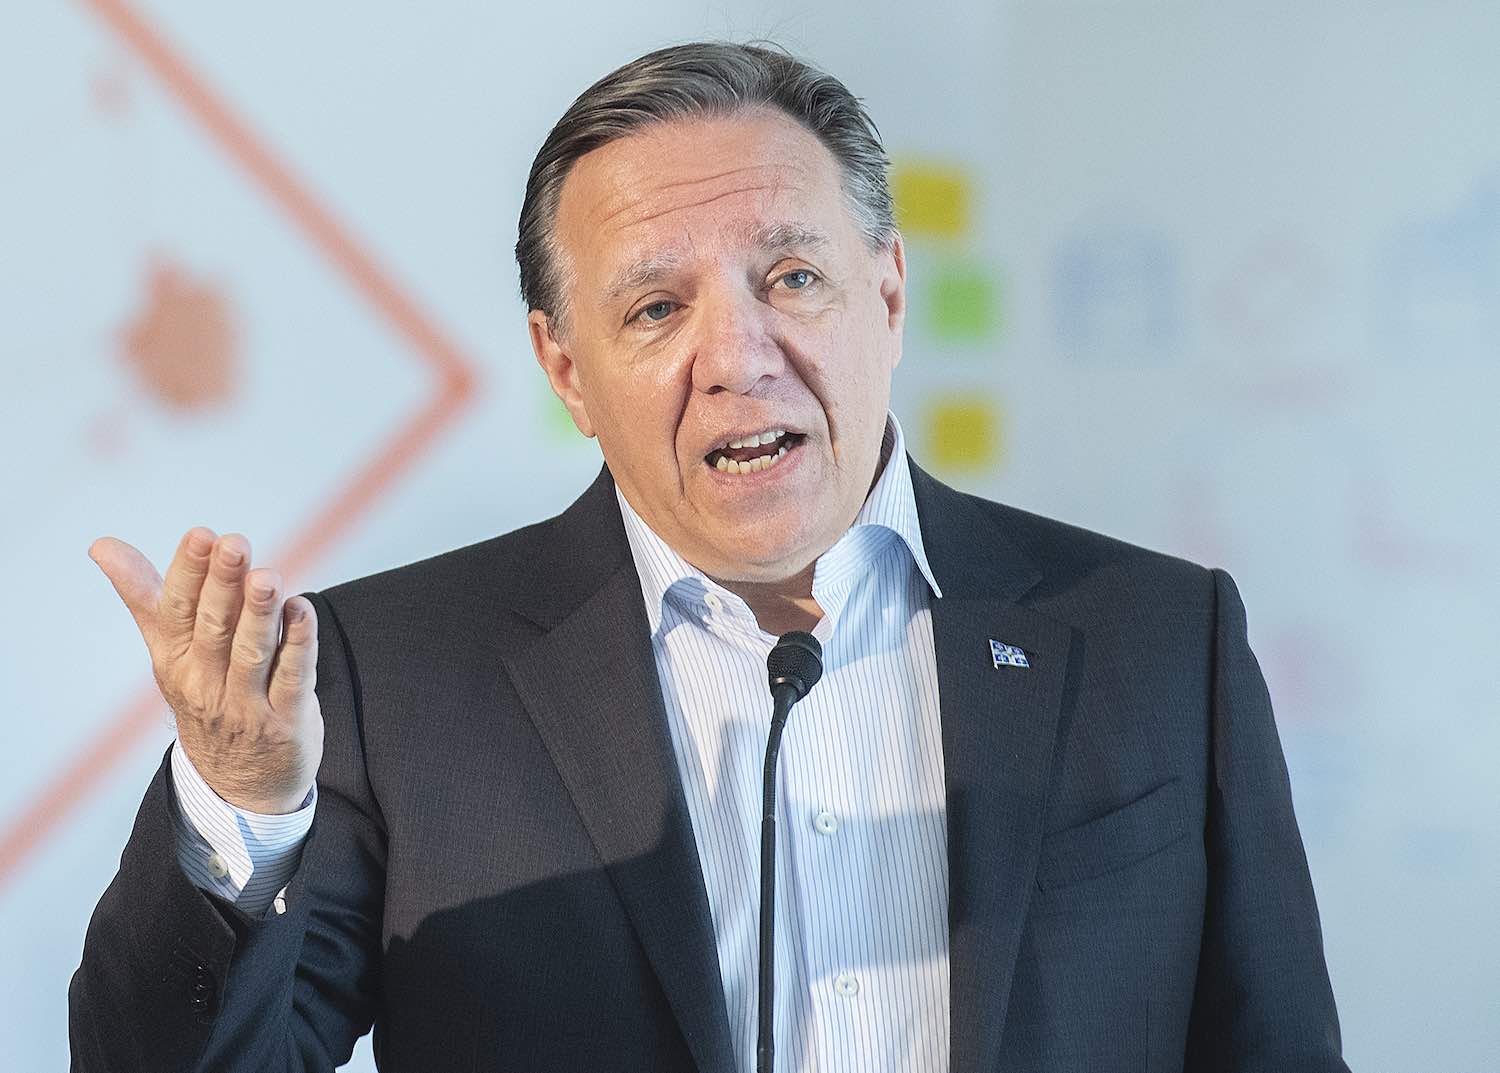 Quebec Premier Francois Legault speaks during a news conference in Montreal, Sunday, June 13, 2021, where he unveiled a Youth Action Plan 2021-2024. THE CANADIAN PRESS/Graham Hughes